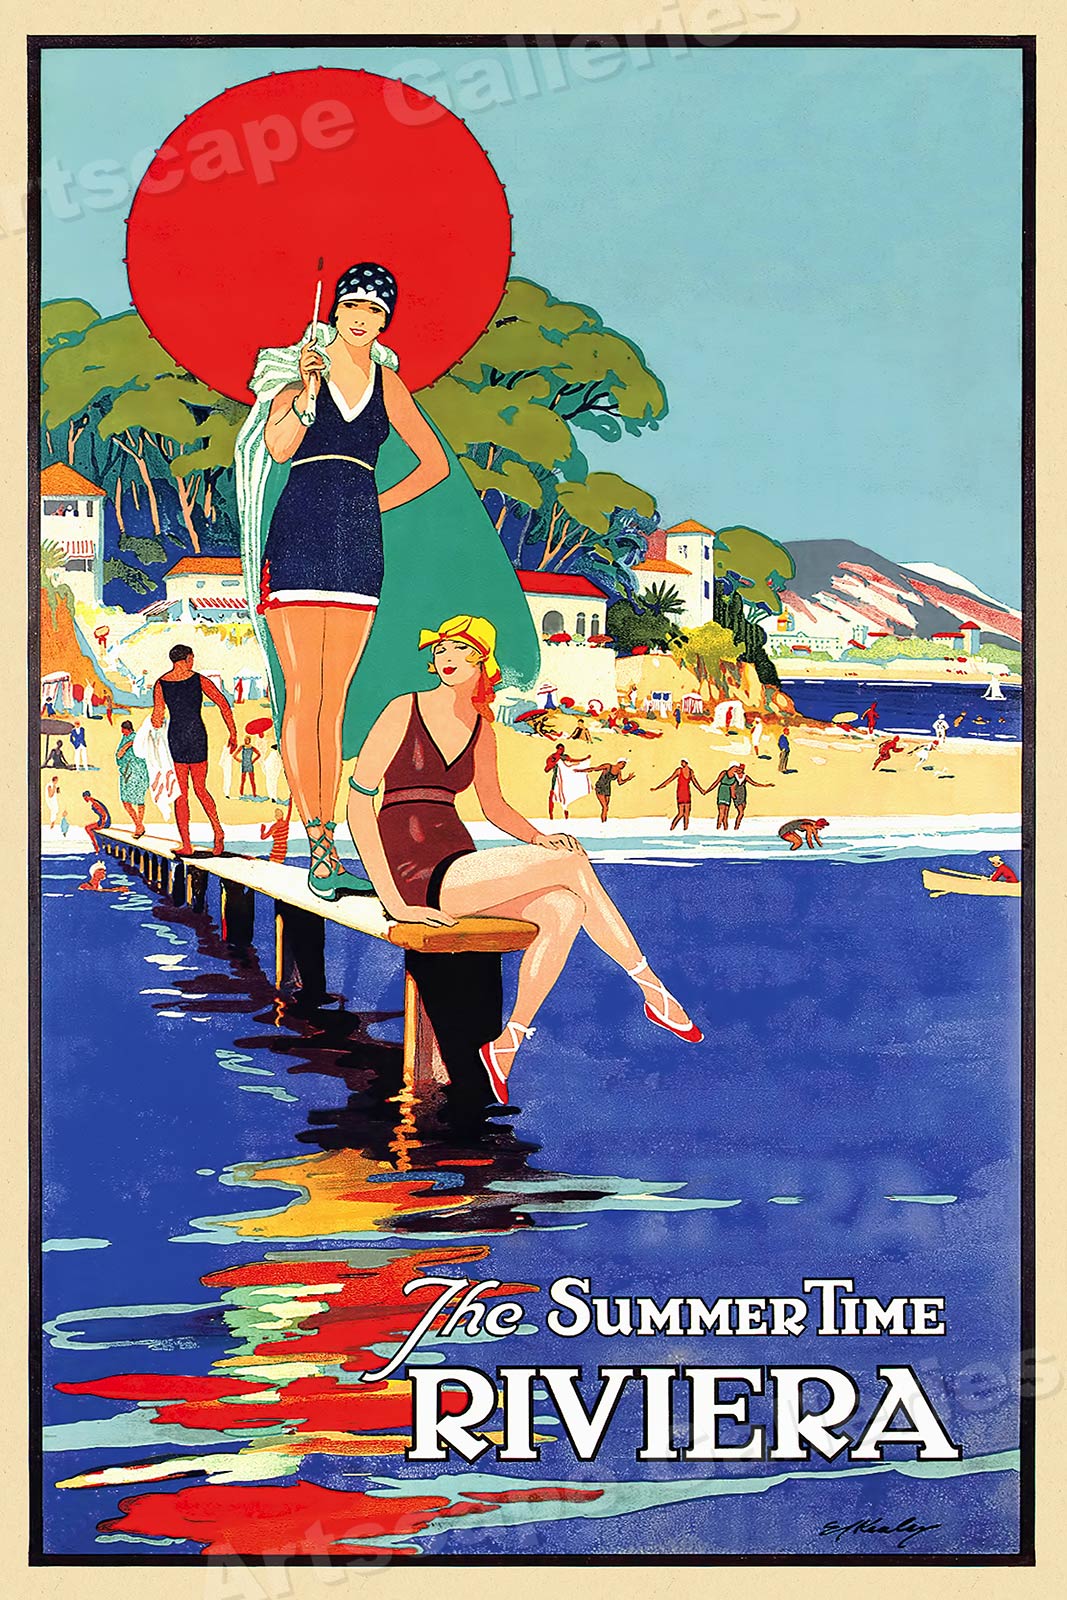 vintage 1930s travel posters